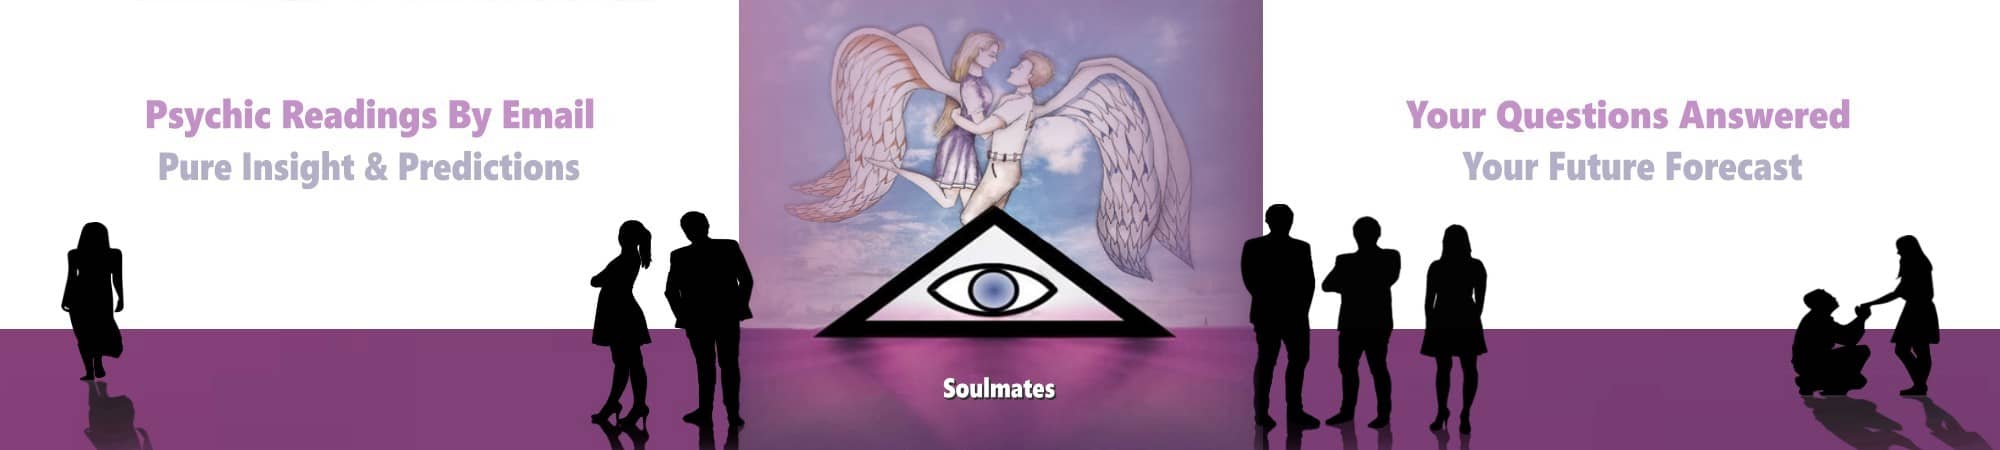 soulmates email psychic readings